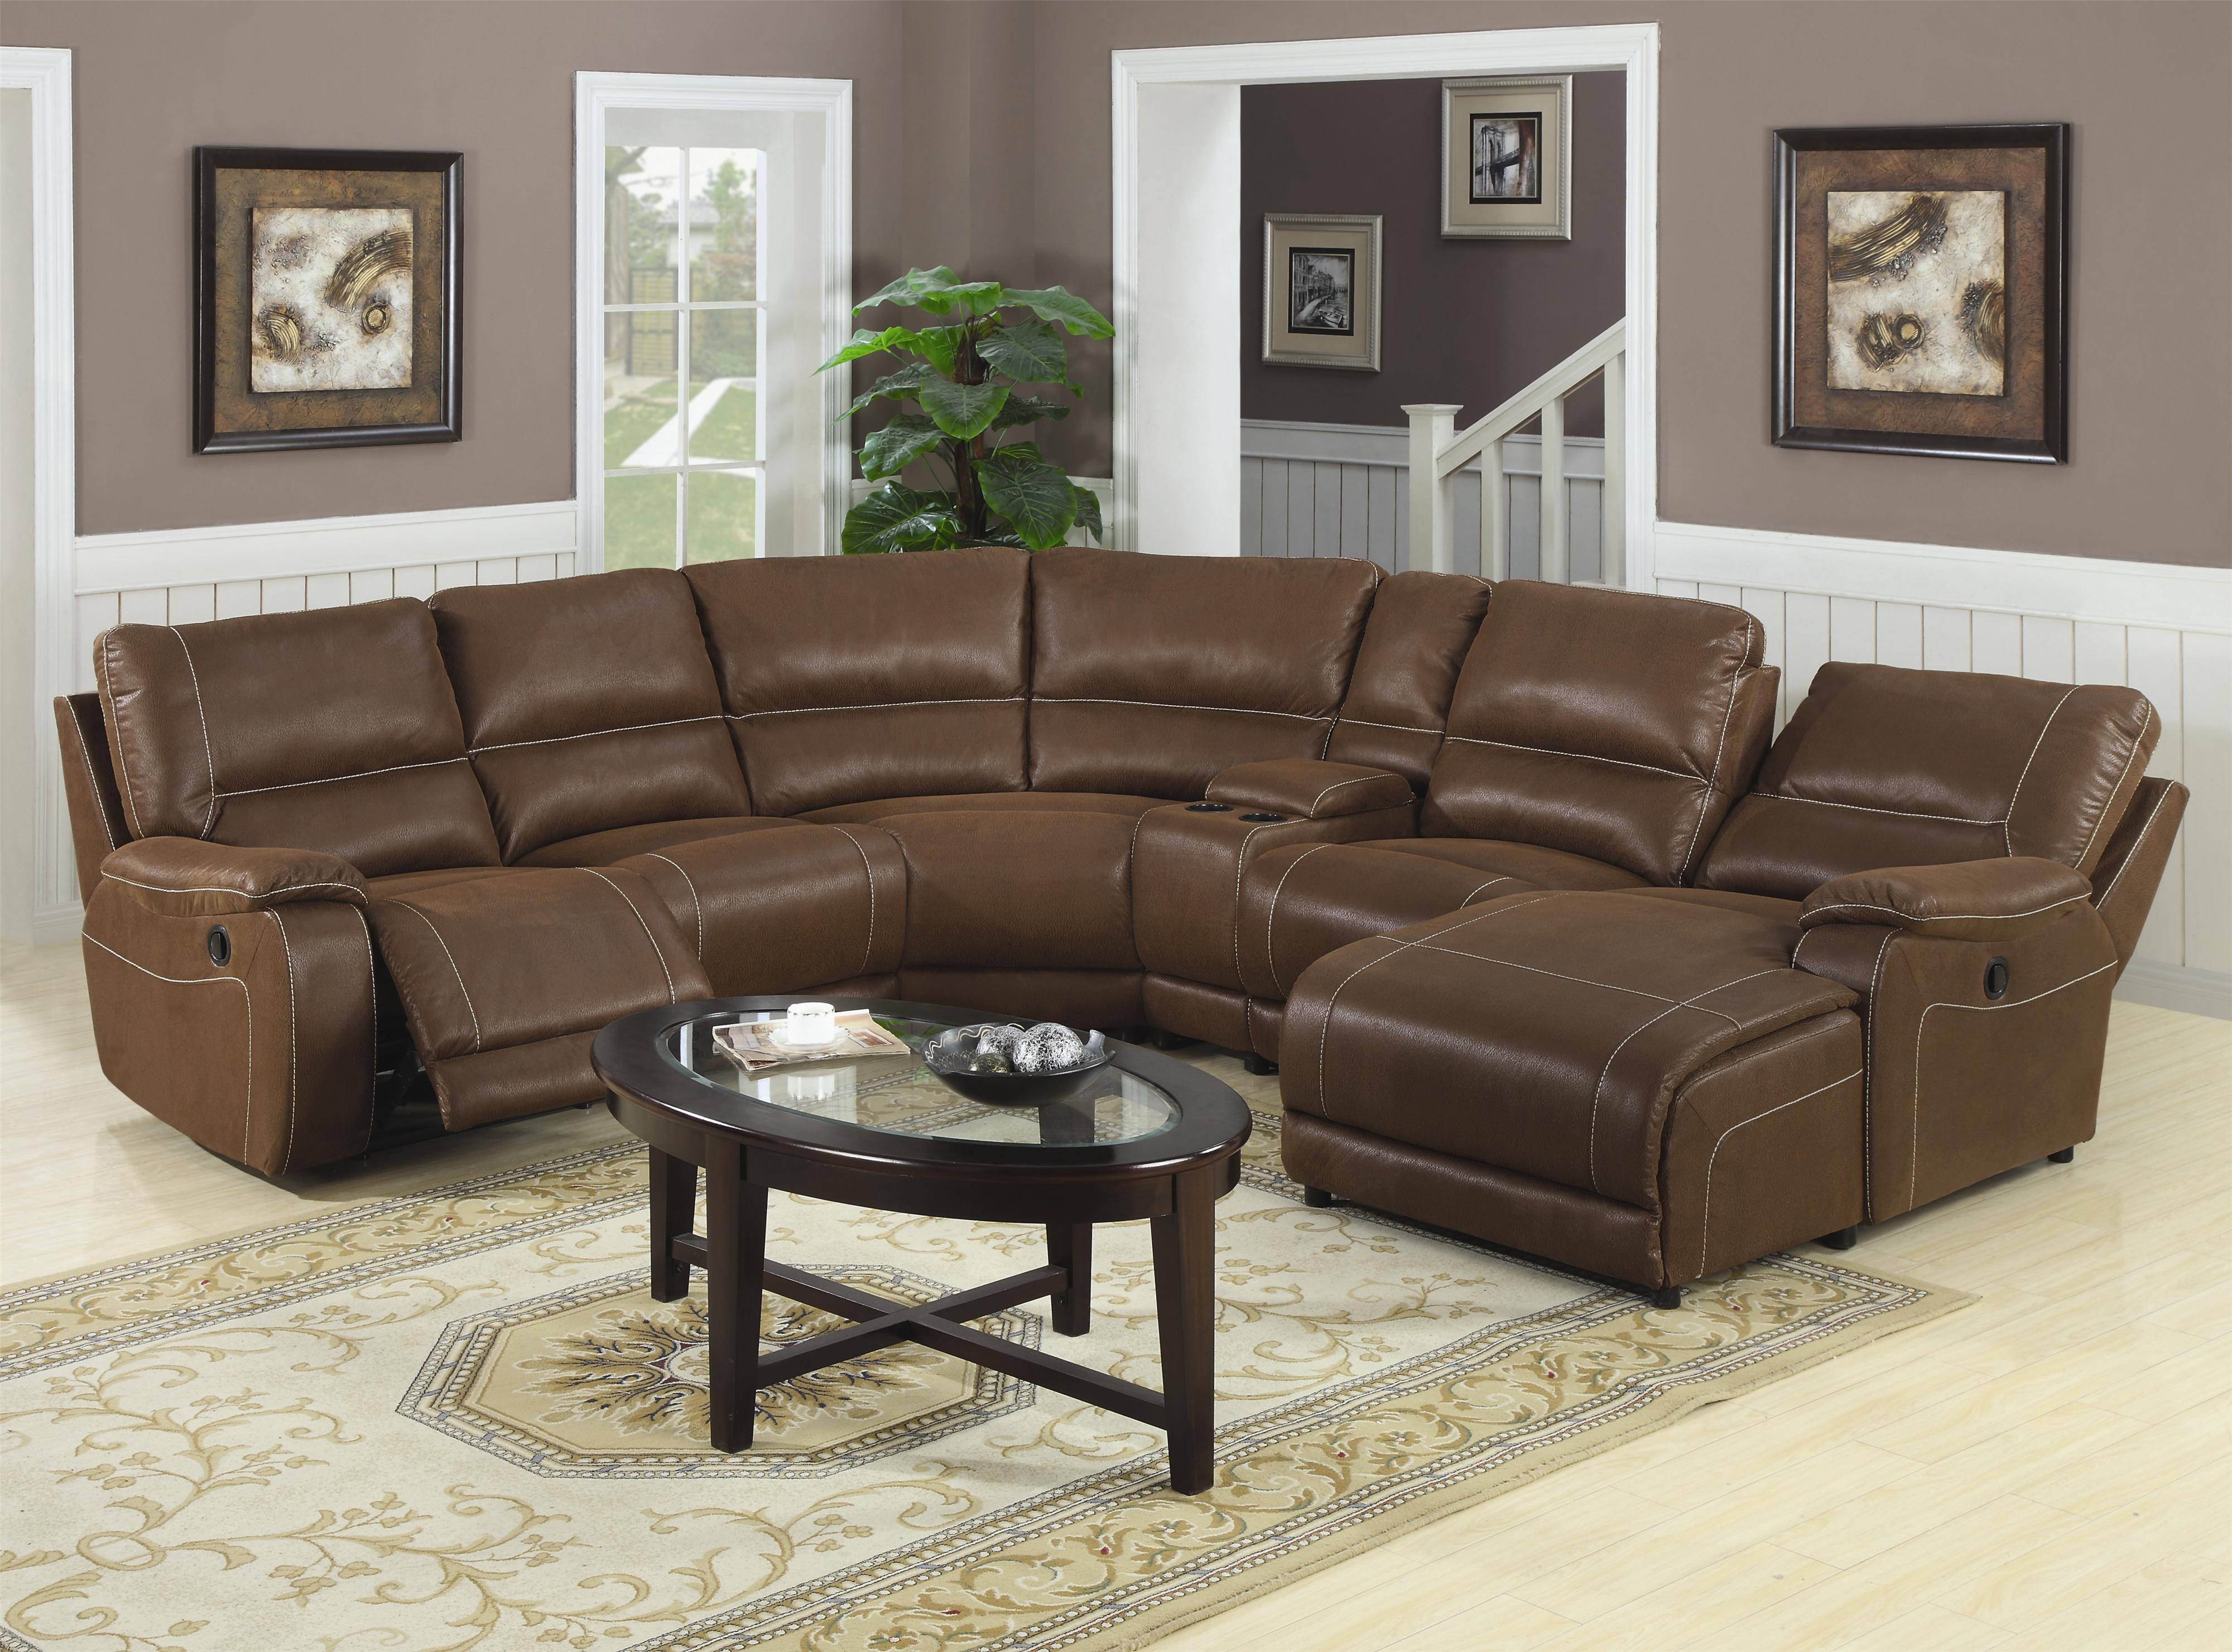 dorel living small spaces faux leather sectional sofa